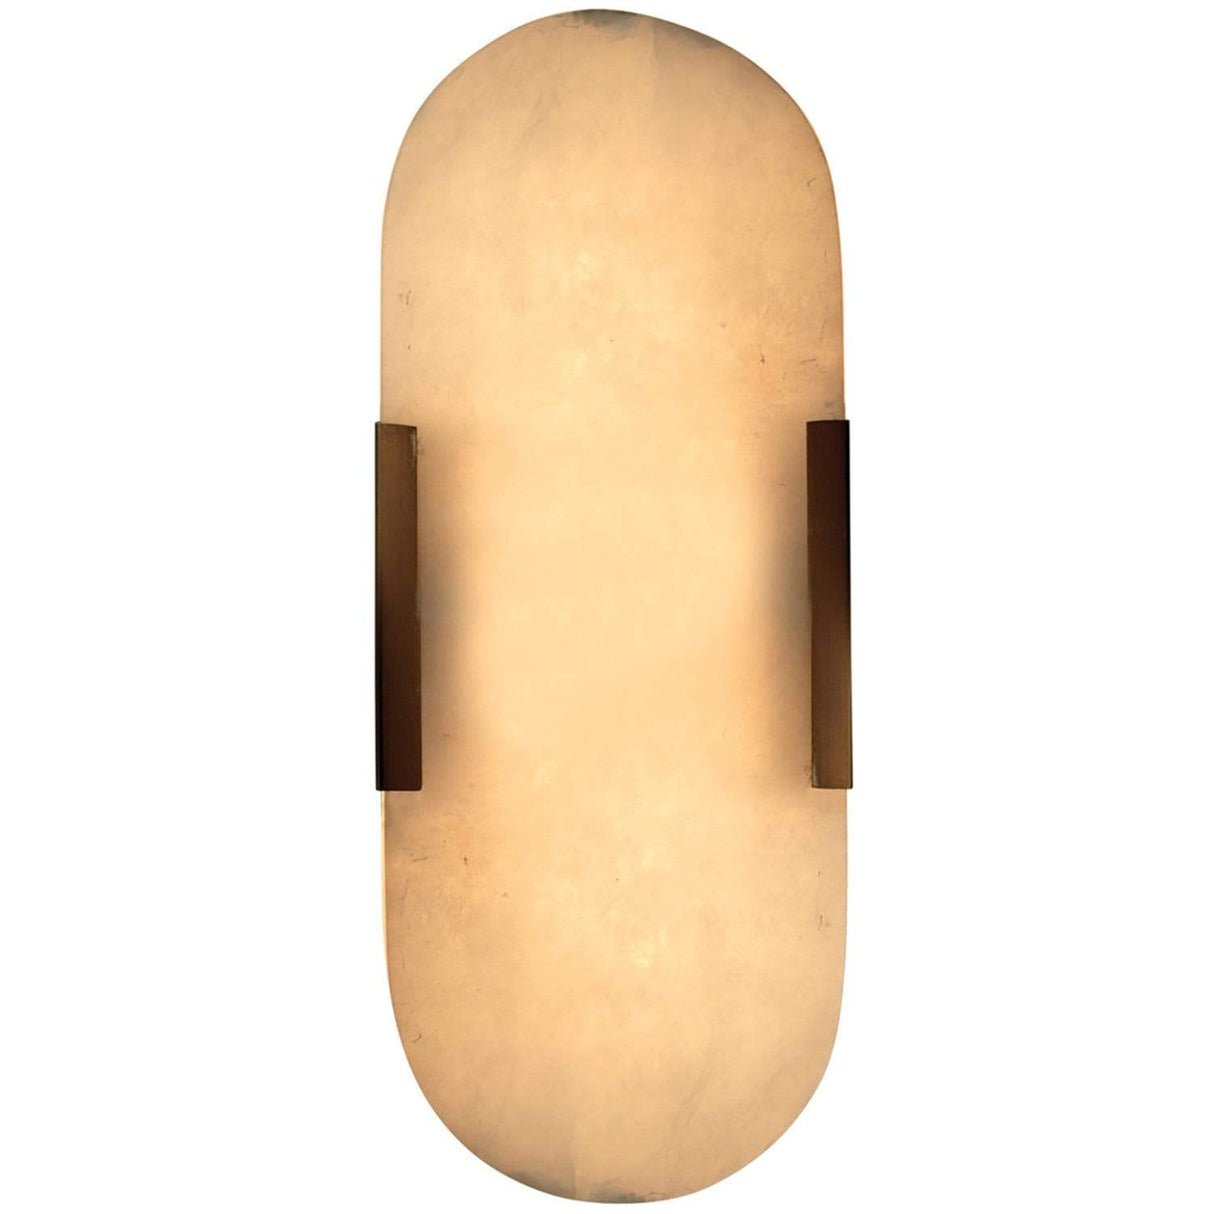 Jamie Young Delphi Wall Sconce - Antique Brass Lighting jamie-young-4DELP-SCAB 00688933025996